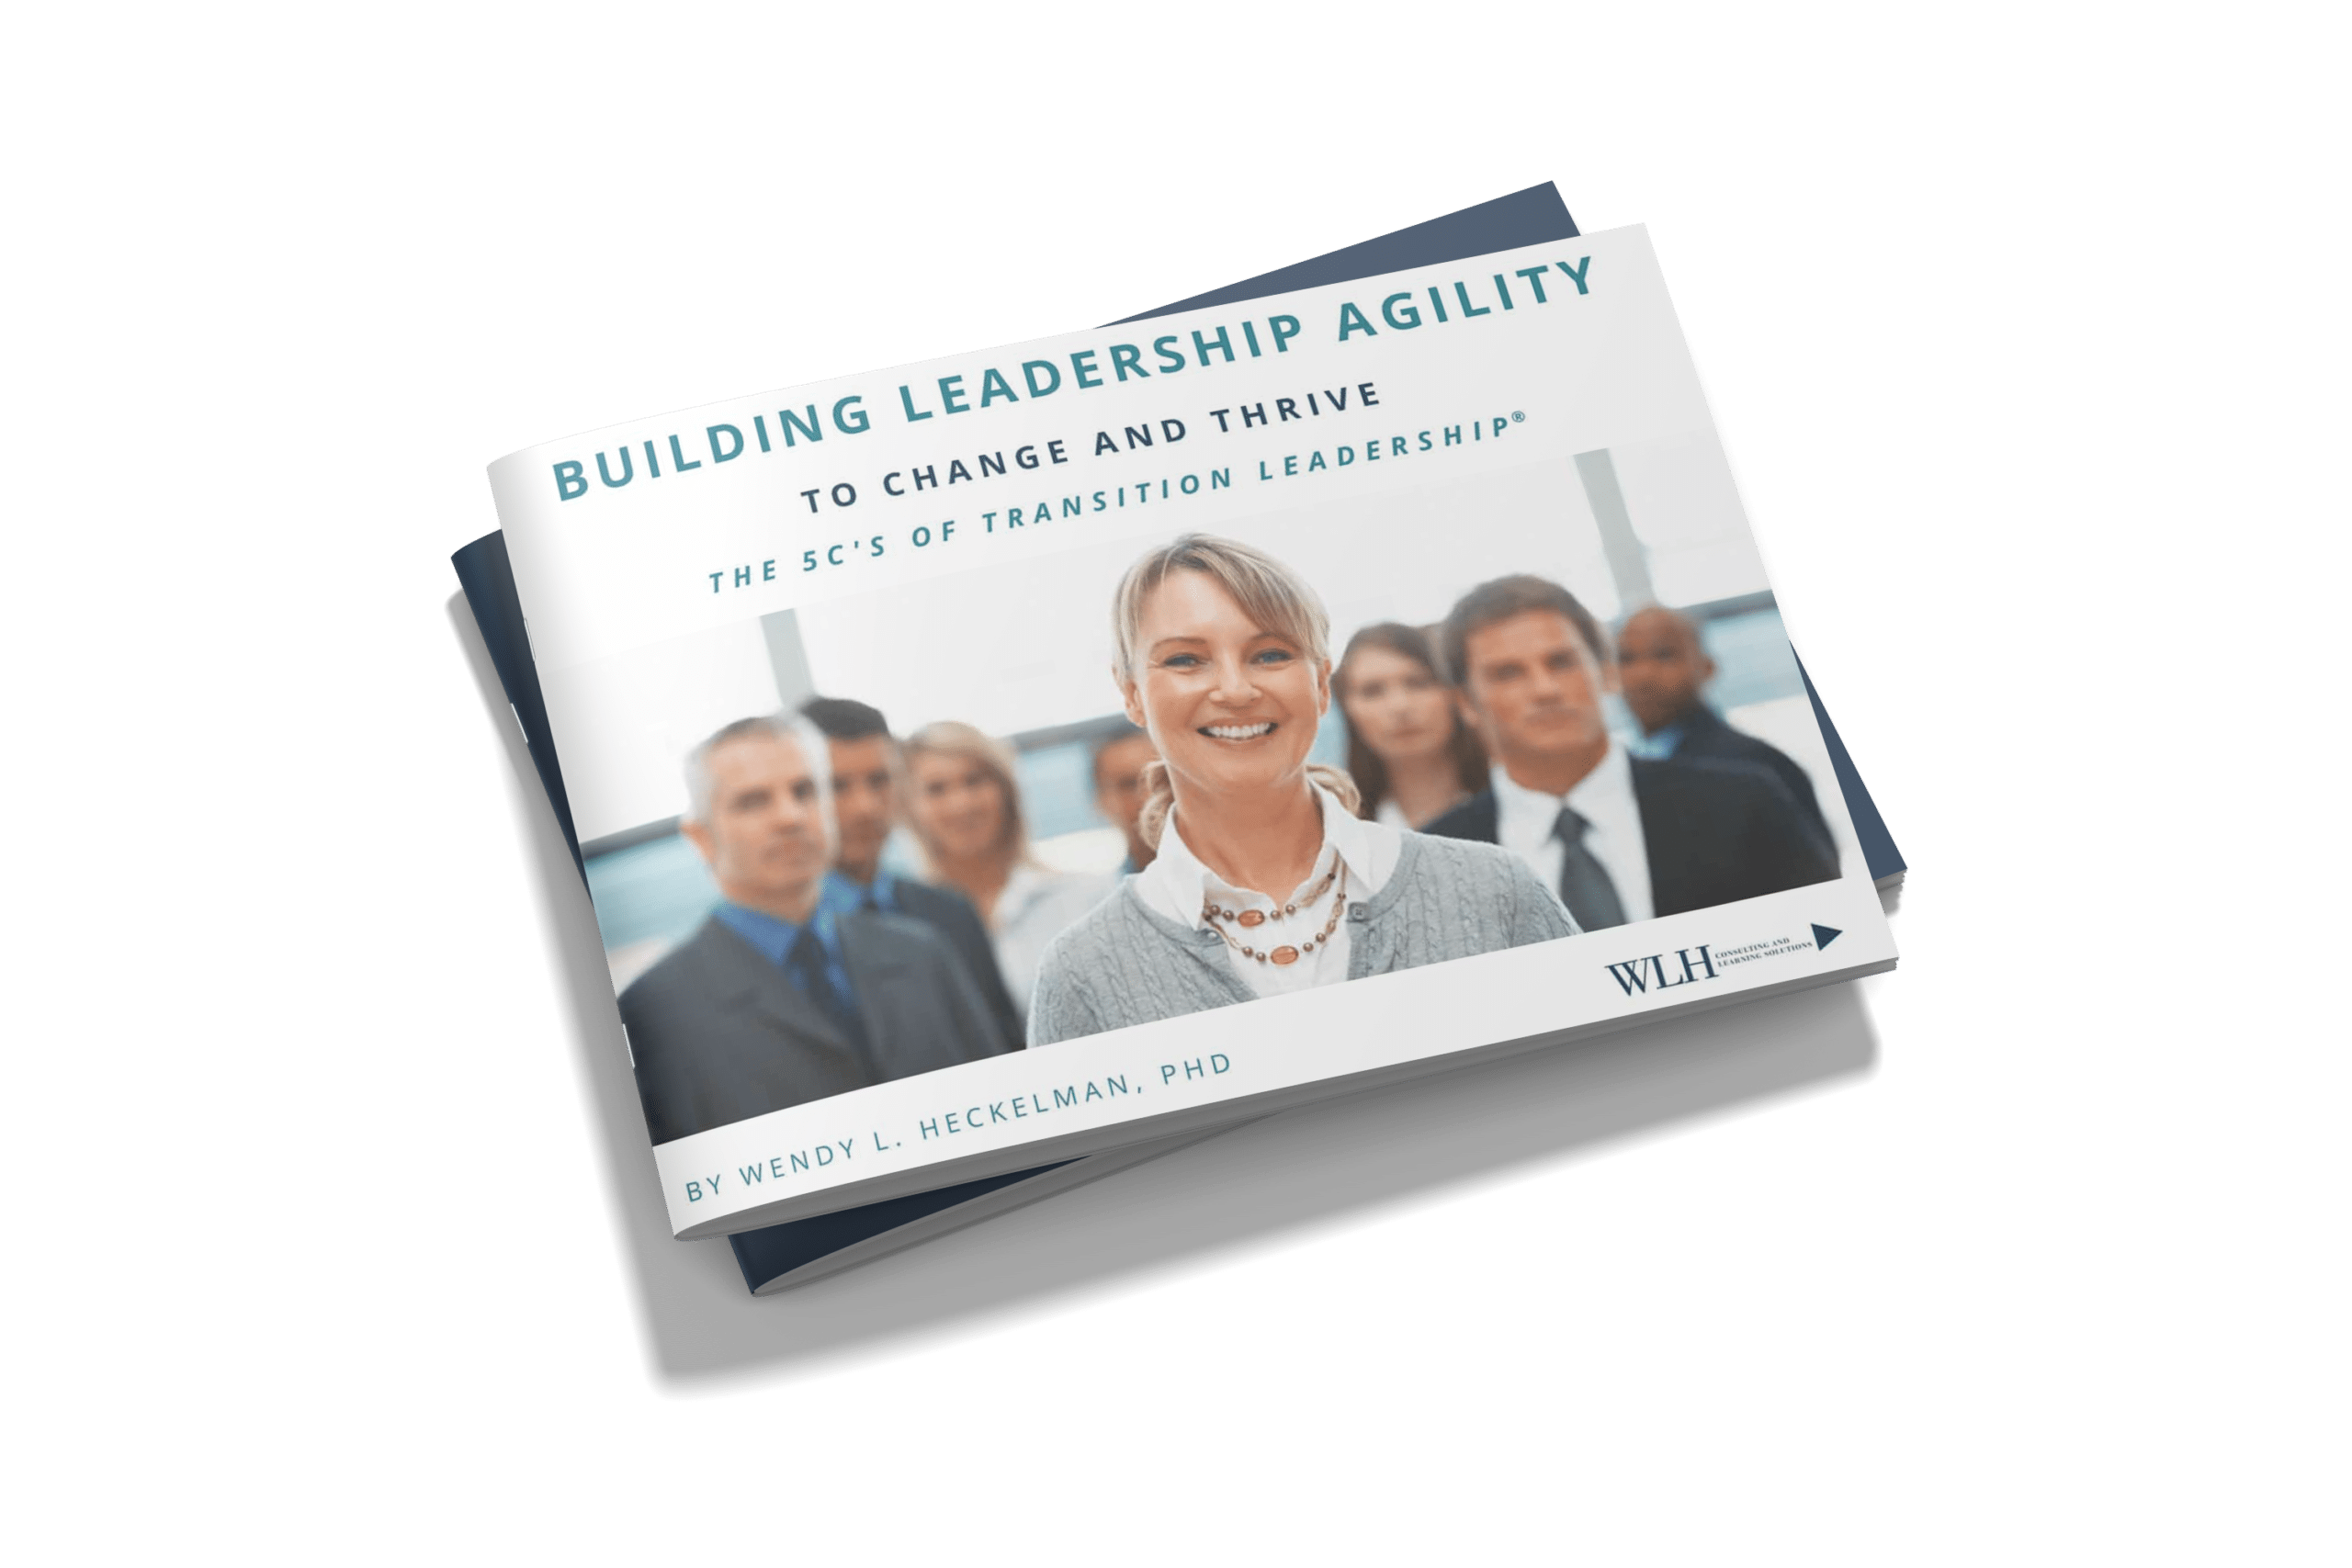 Building Leadership Agility to Change and Thrive